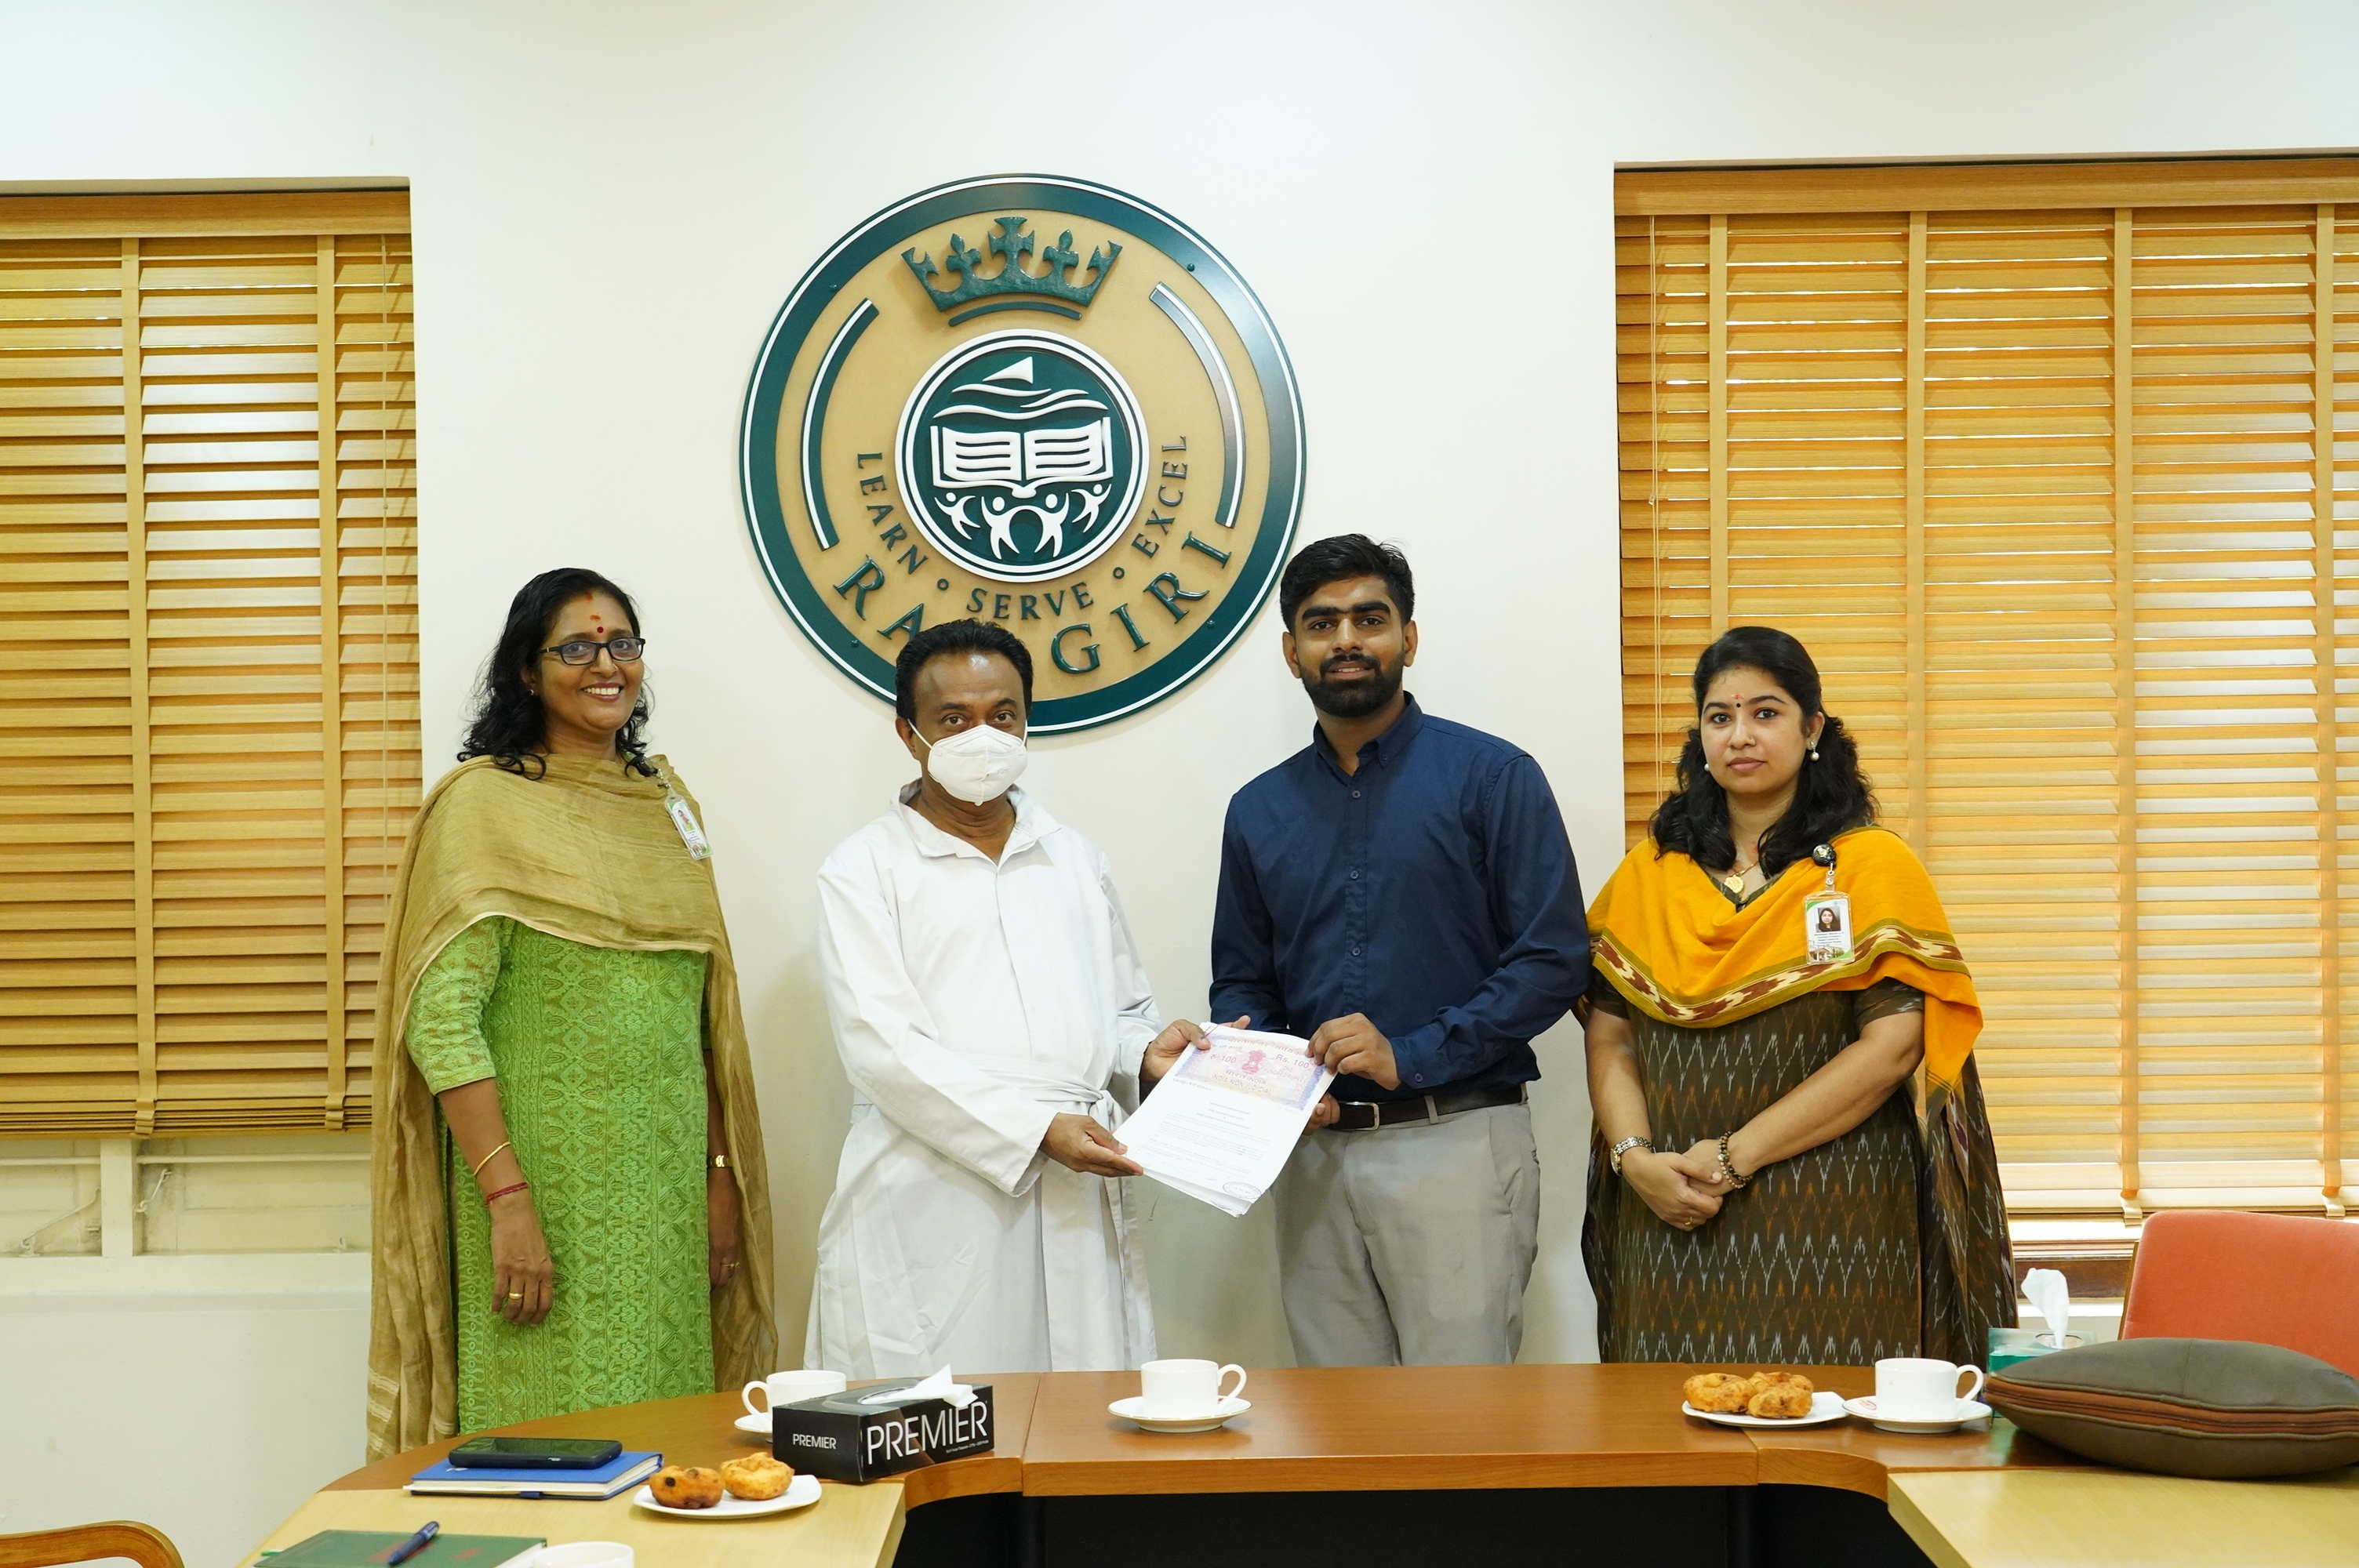 Agreement of Cooperation with Miles Education Pvt Ltd